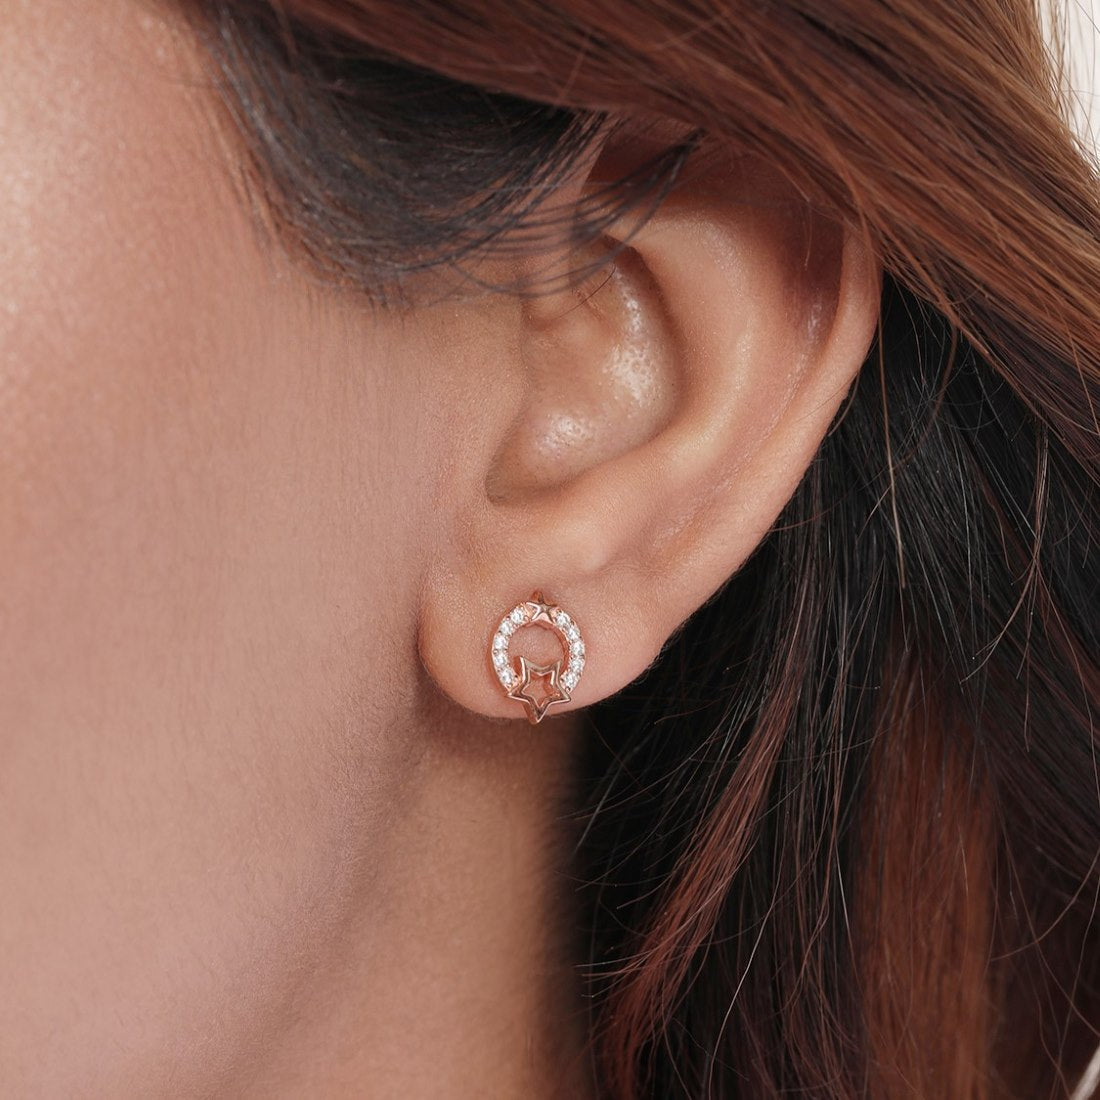 Celestial Harmony Rose Gold-Plated 925 Sterling Silver Earrings